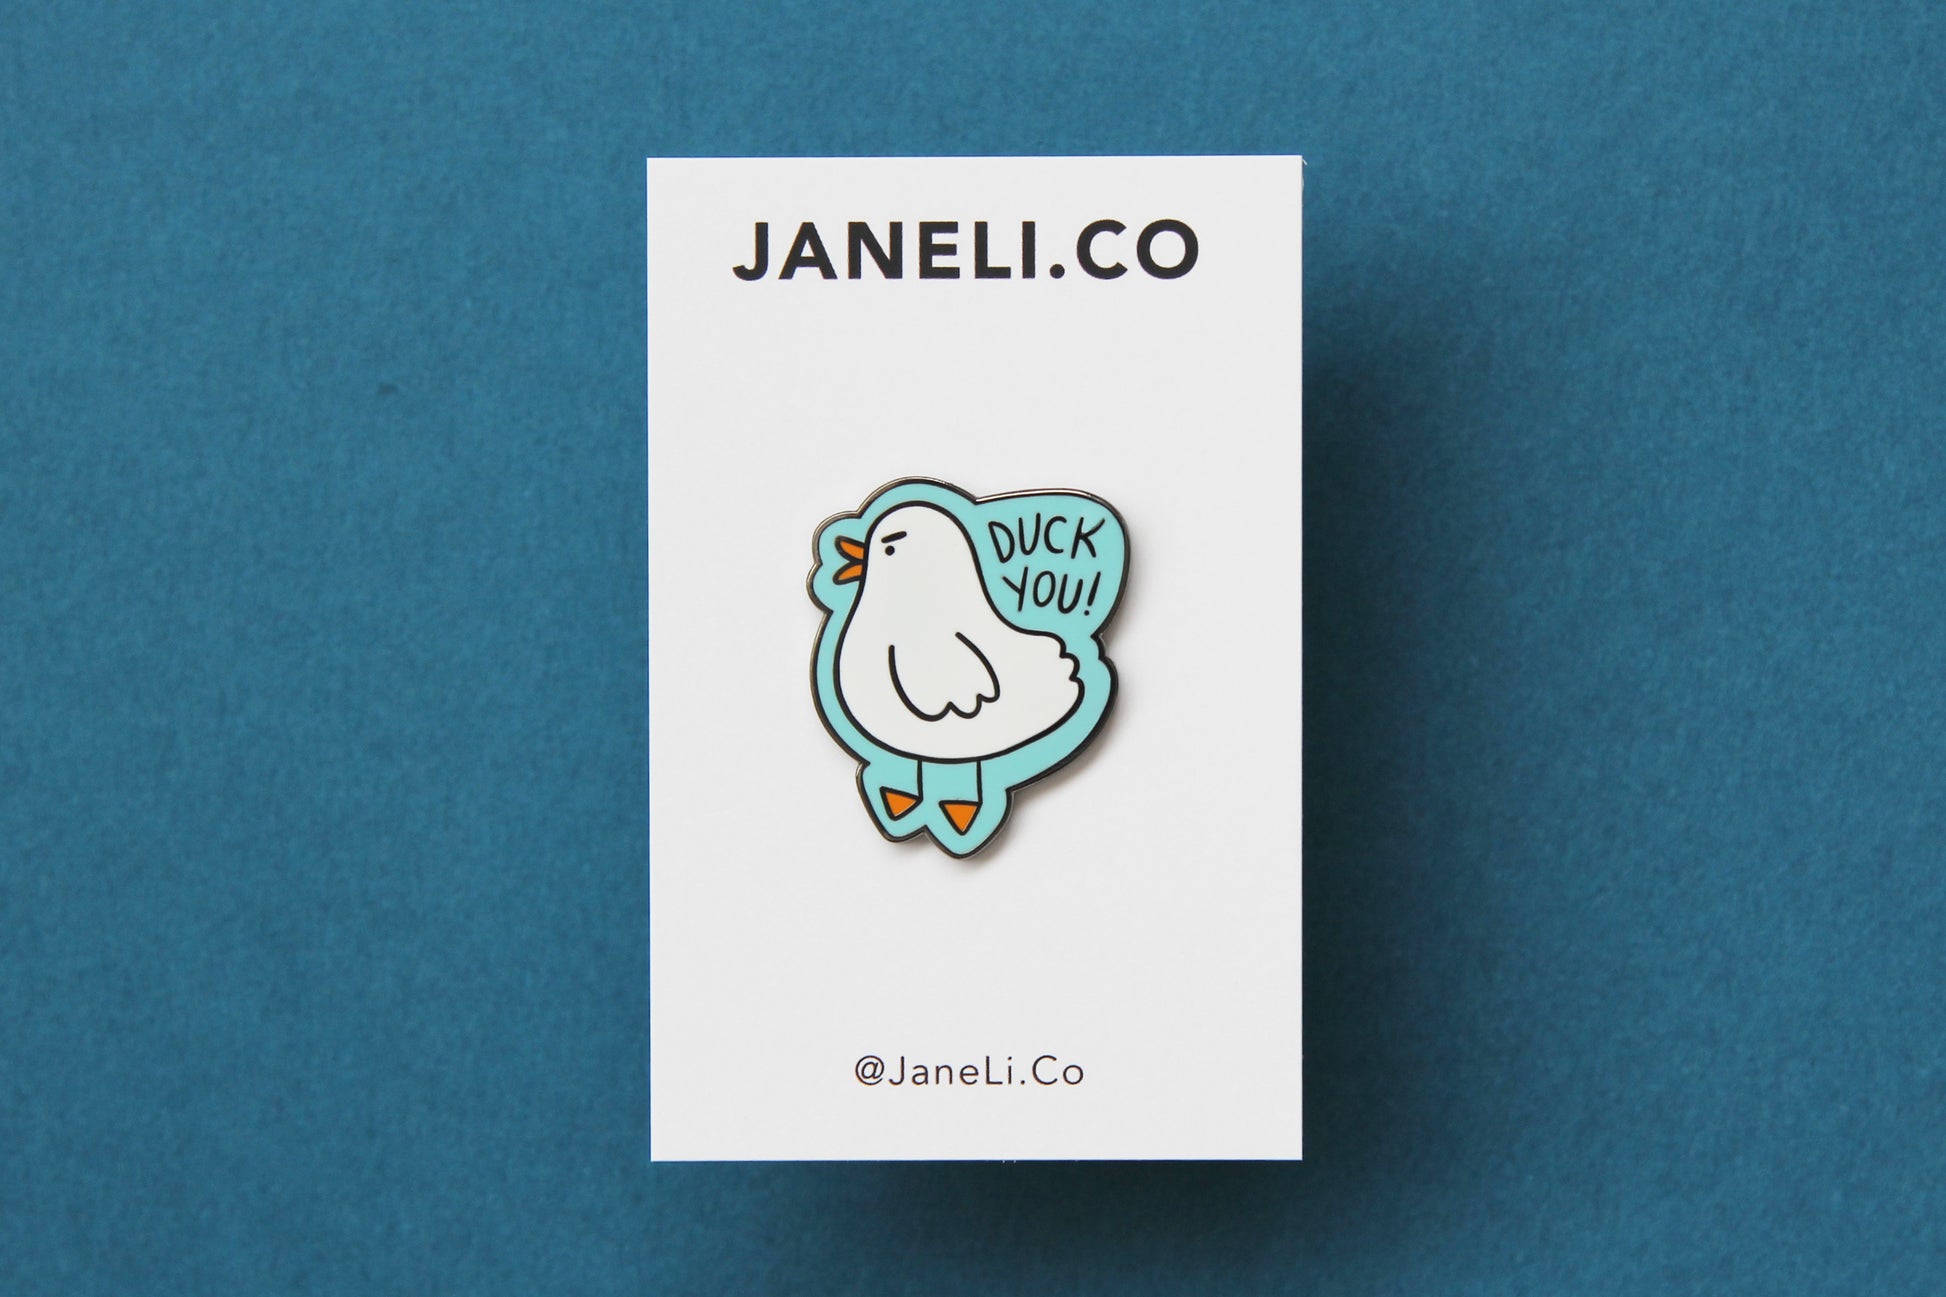 An enamel pin showing an angry white duck saying "Duck you!" on a white JaneLi.Co backing card over a teal background.